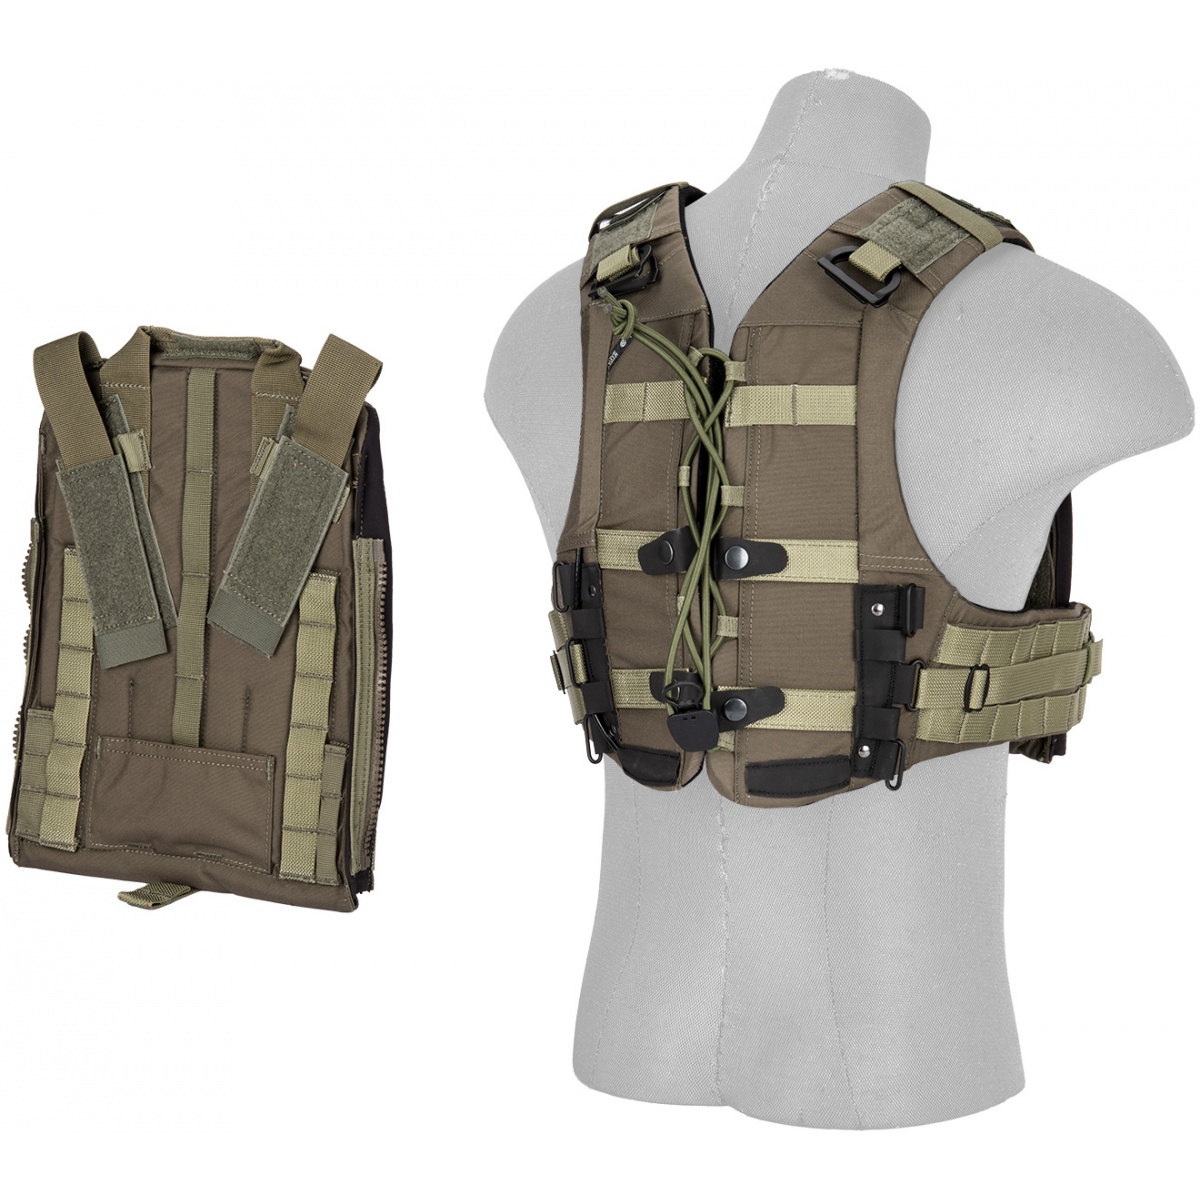 Crye Precision Licensed AVS Adaptive Vest System Plate Carrier